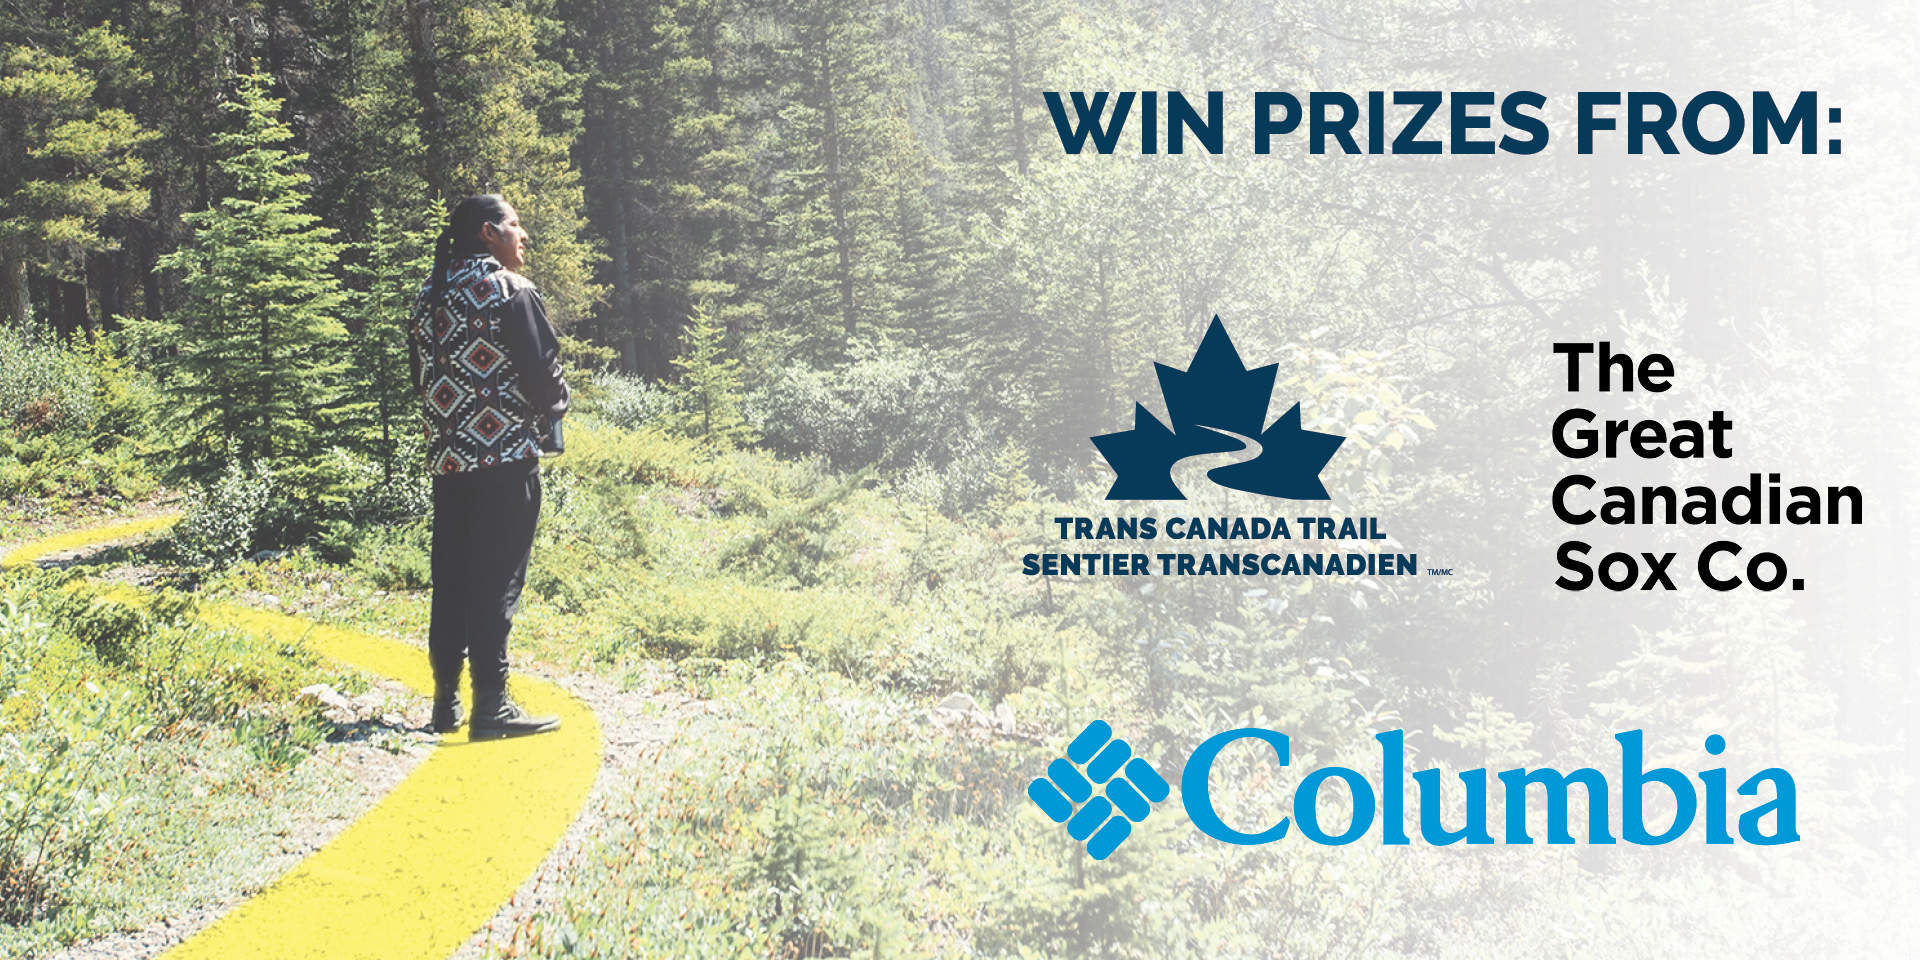 A man standing on the trail surrounded by trees. Image includes the Tranas Canada Trail logo, The Great Canadian Sox Co. logo and the Columbia logo